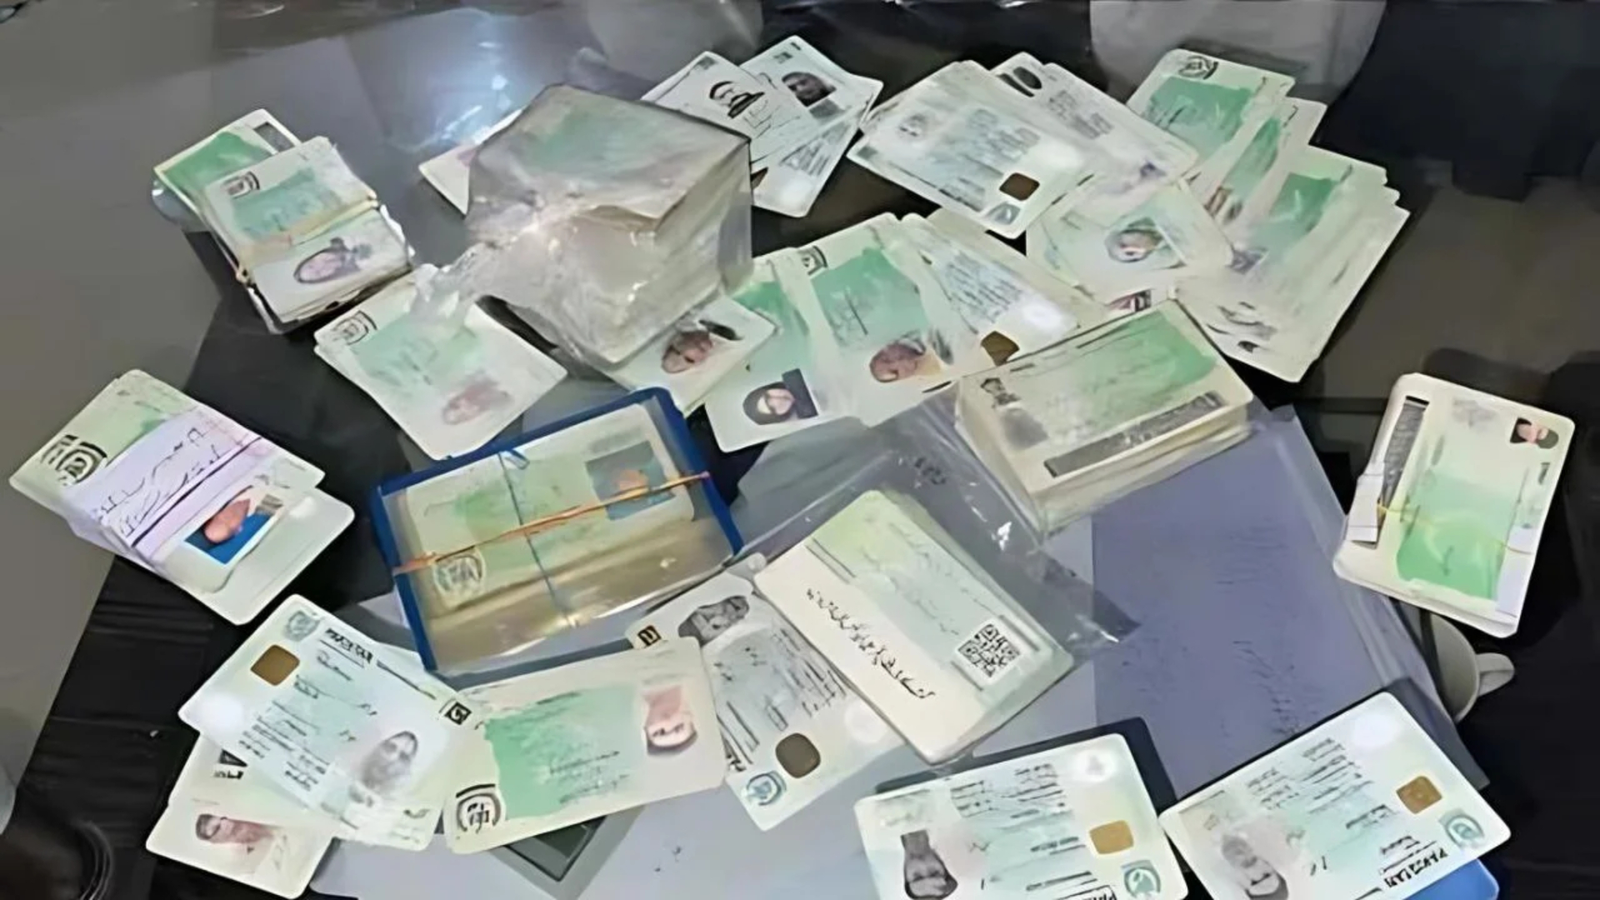 Pakistan’s crackdown uncovers over 53,000 fake identity cards